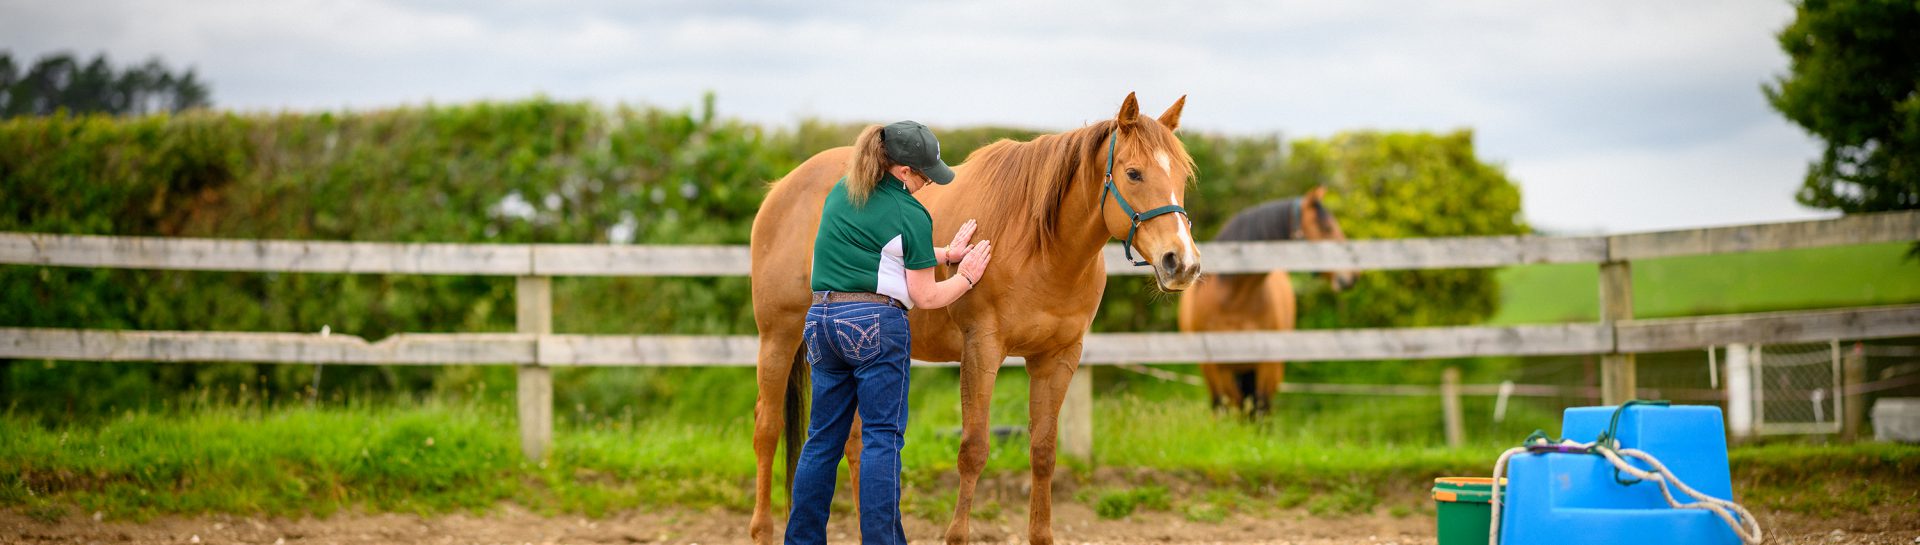 Equine Complimentary Therapy Image 2